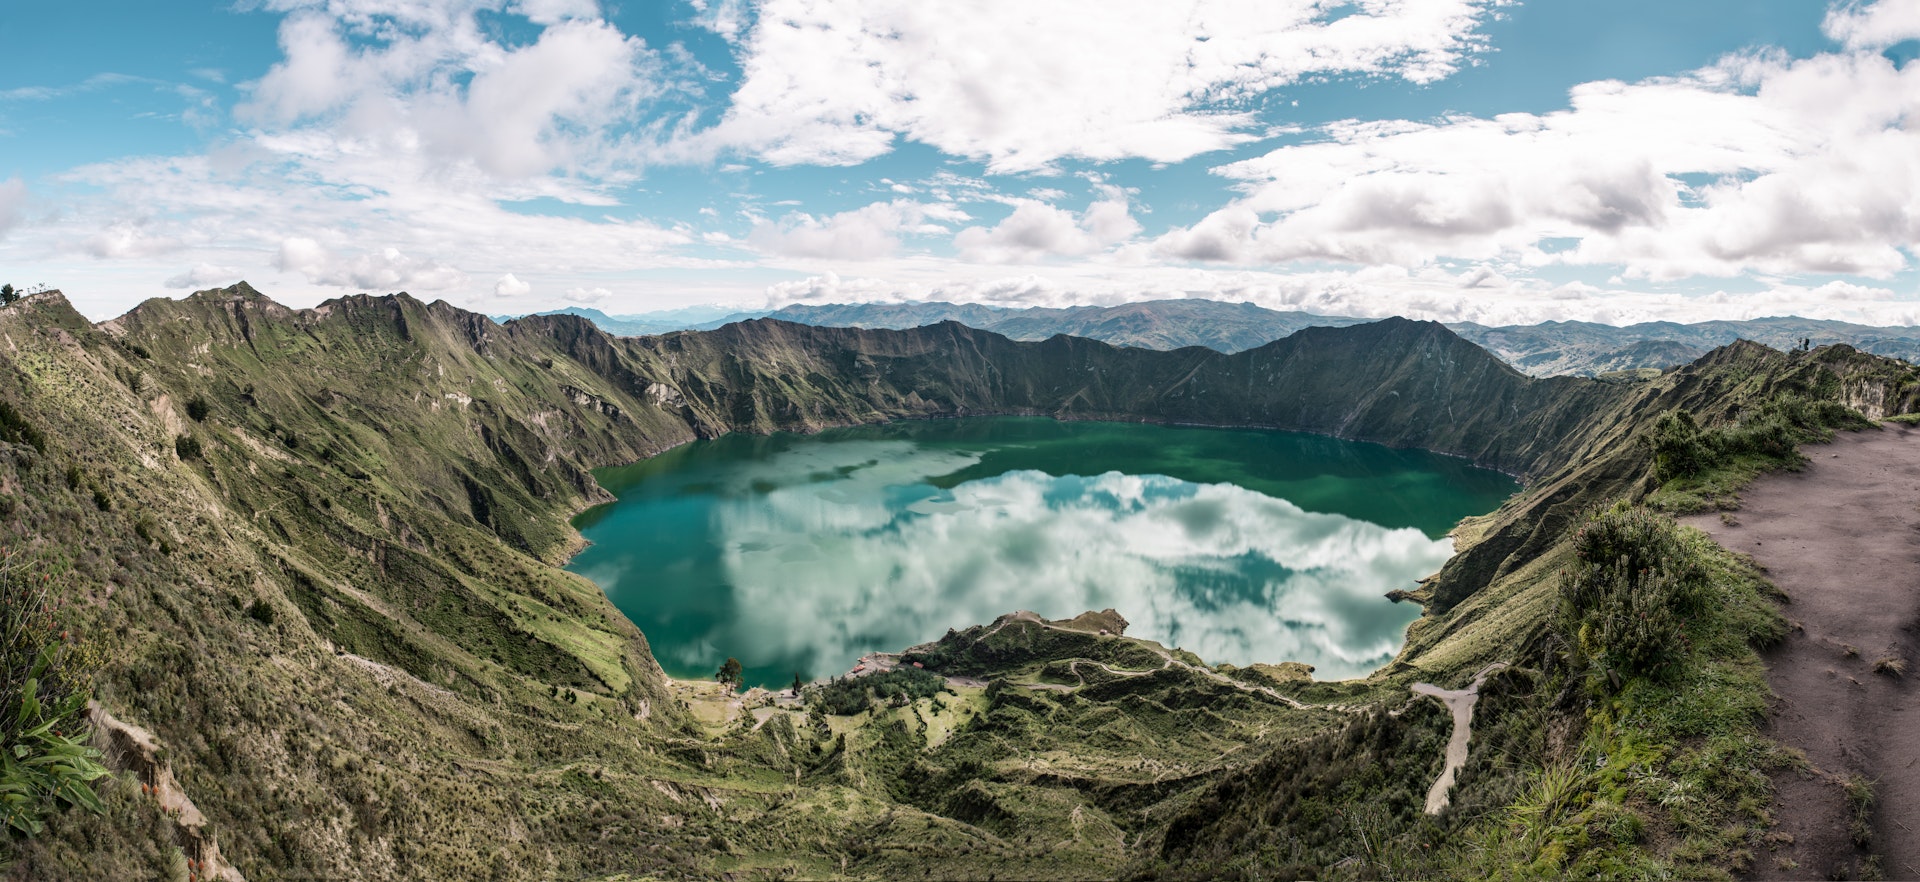 An aerial view of the blue-green lake in the Quilotoa crater